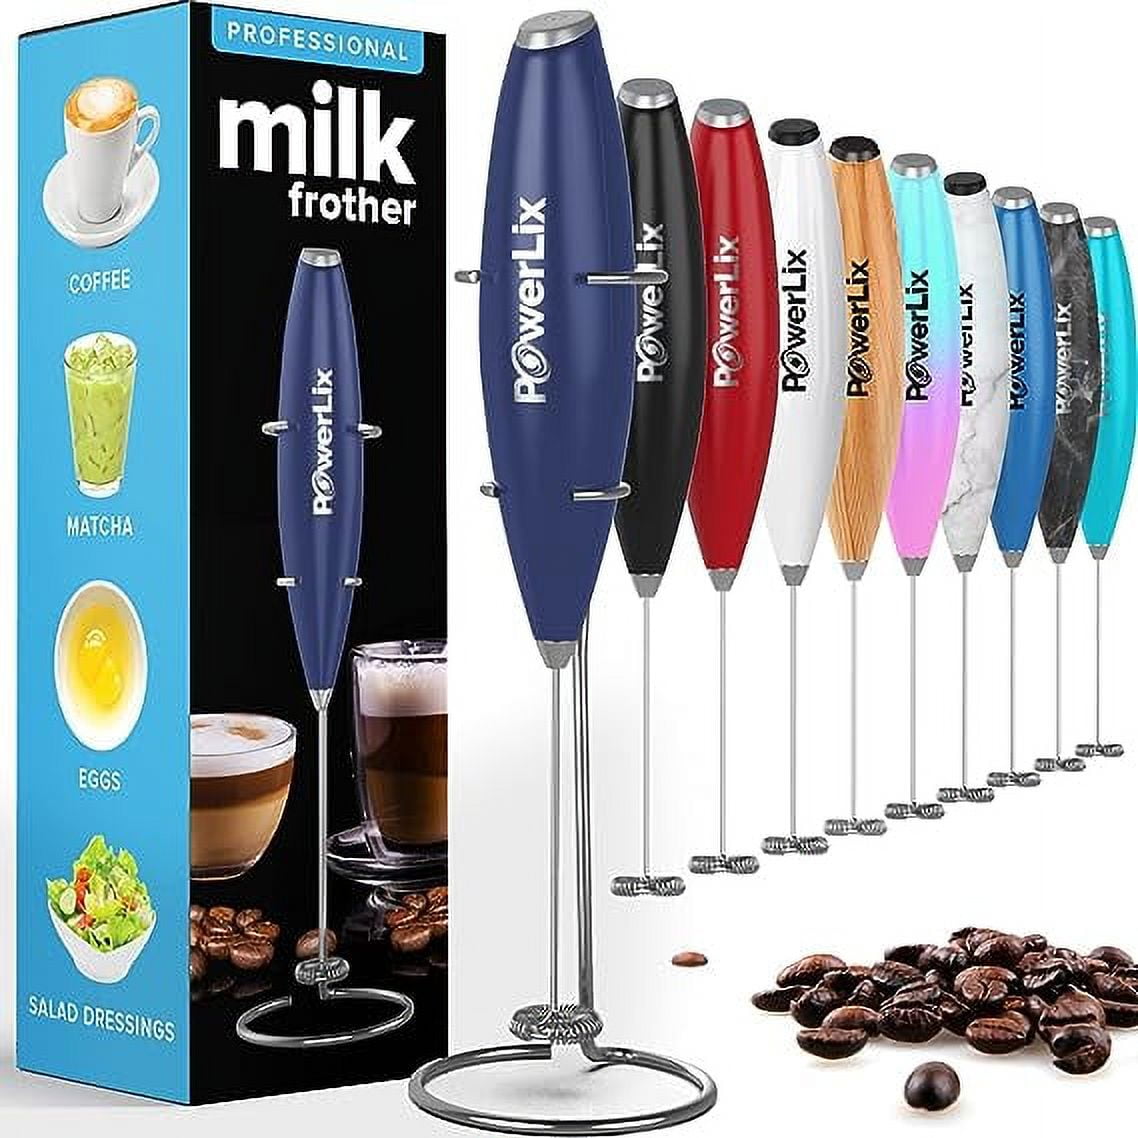 FIRM PRICE! NEW in a Box Handheld Cordless Milk Frother - household items -  by owner - housewares sale - craigslist